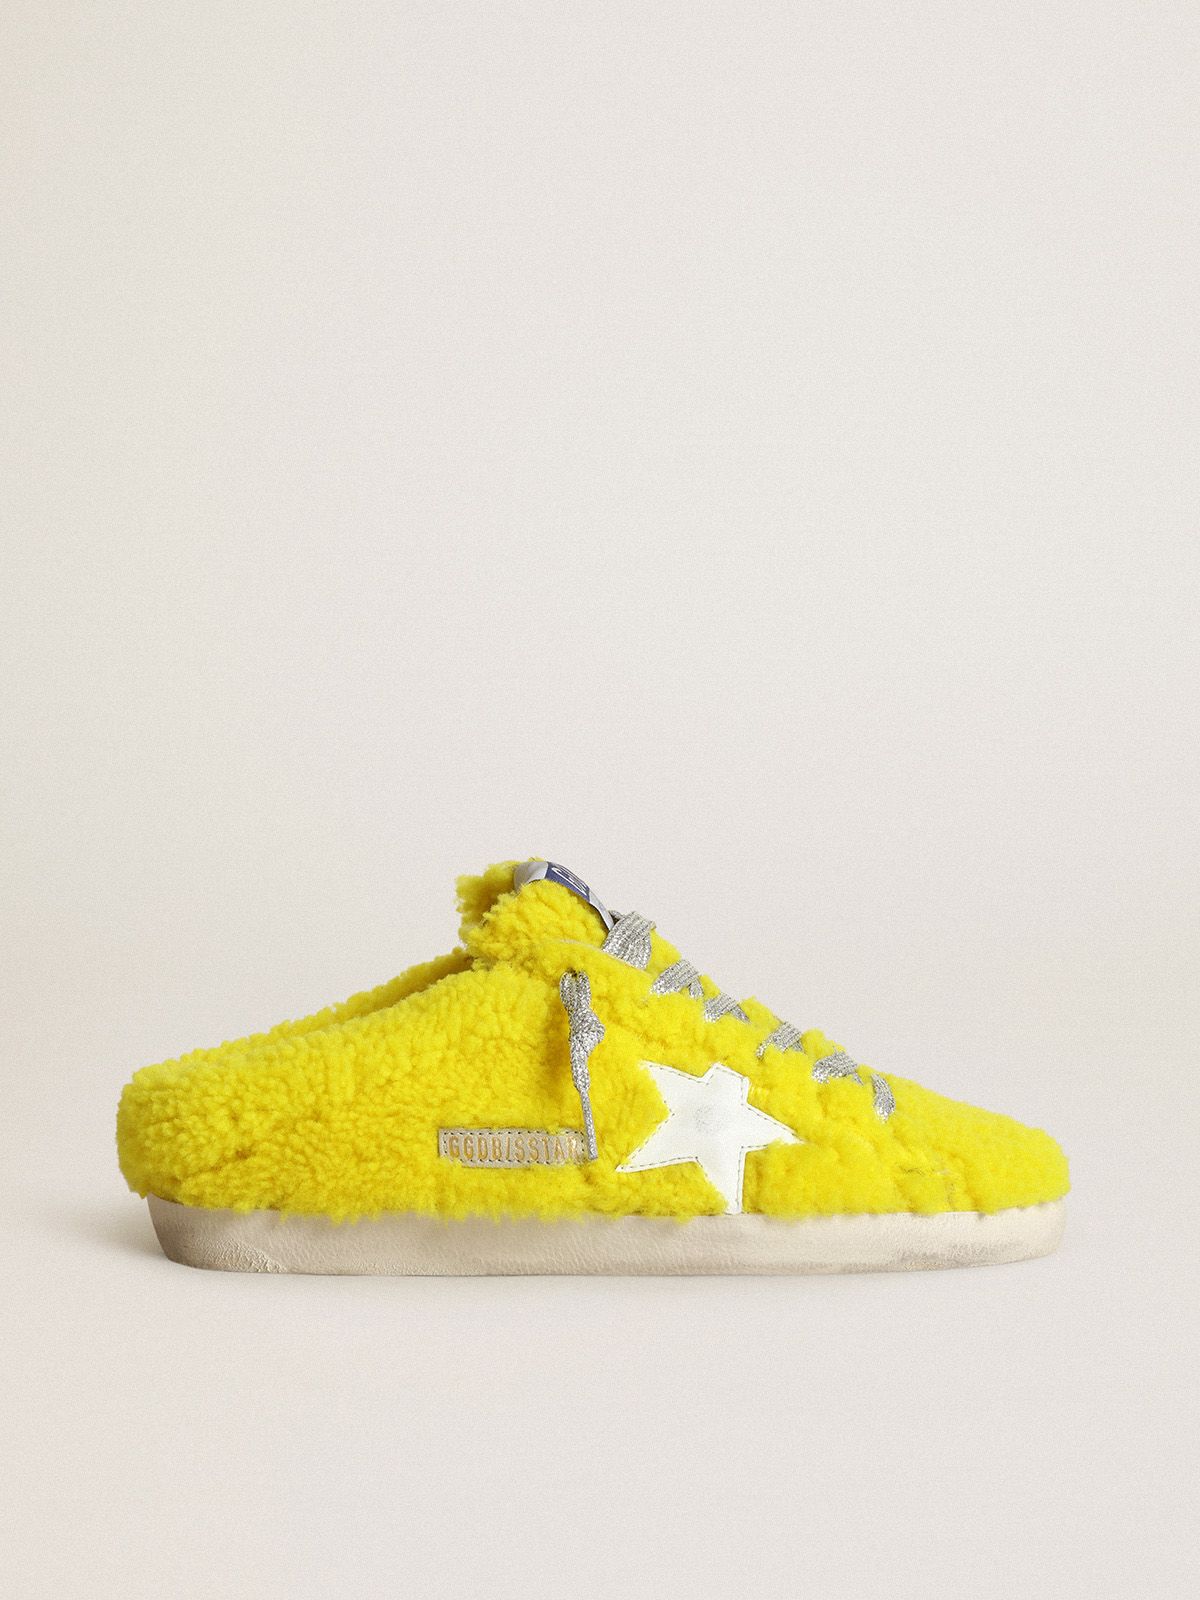 golden goose with leather shearling star white Sabots in yellow fluorescent Super-Star